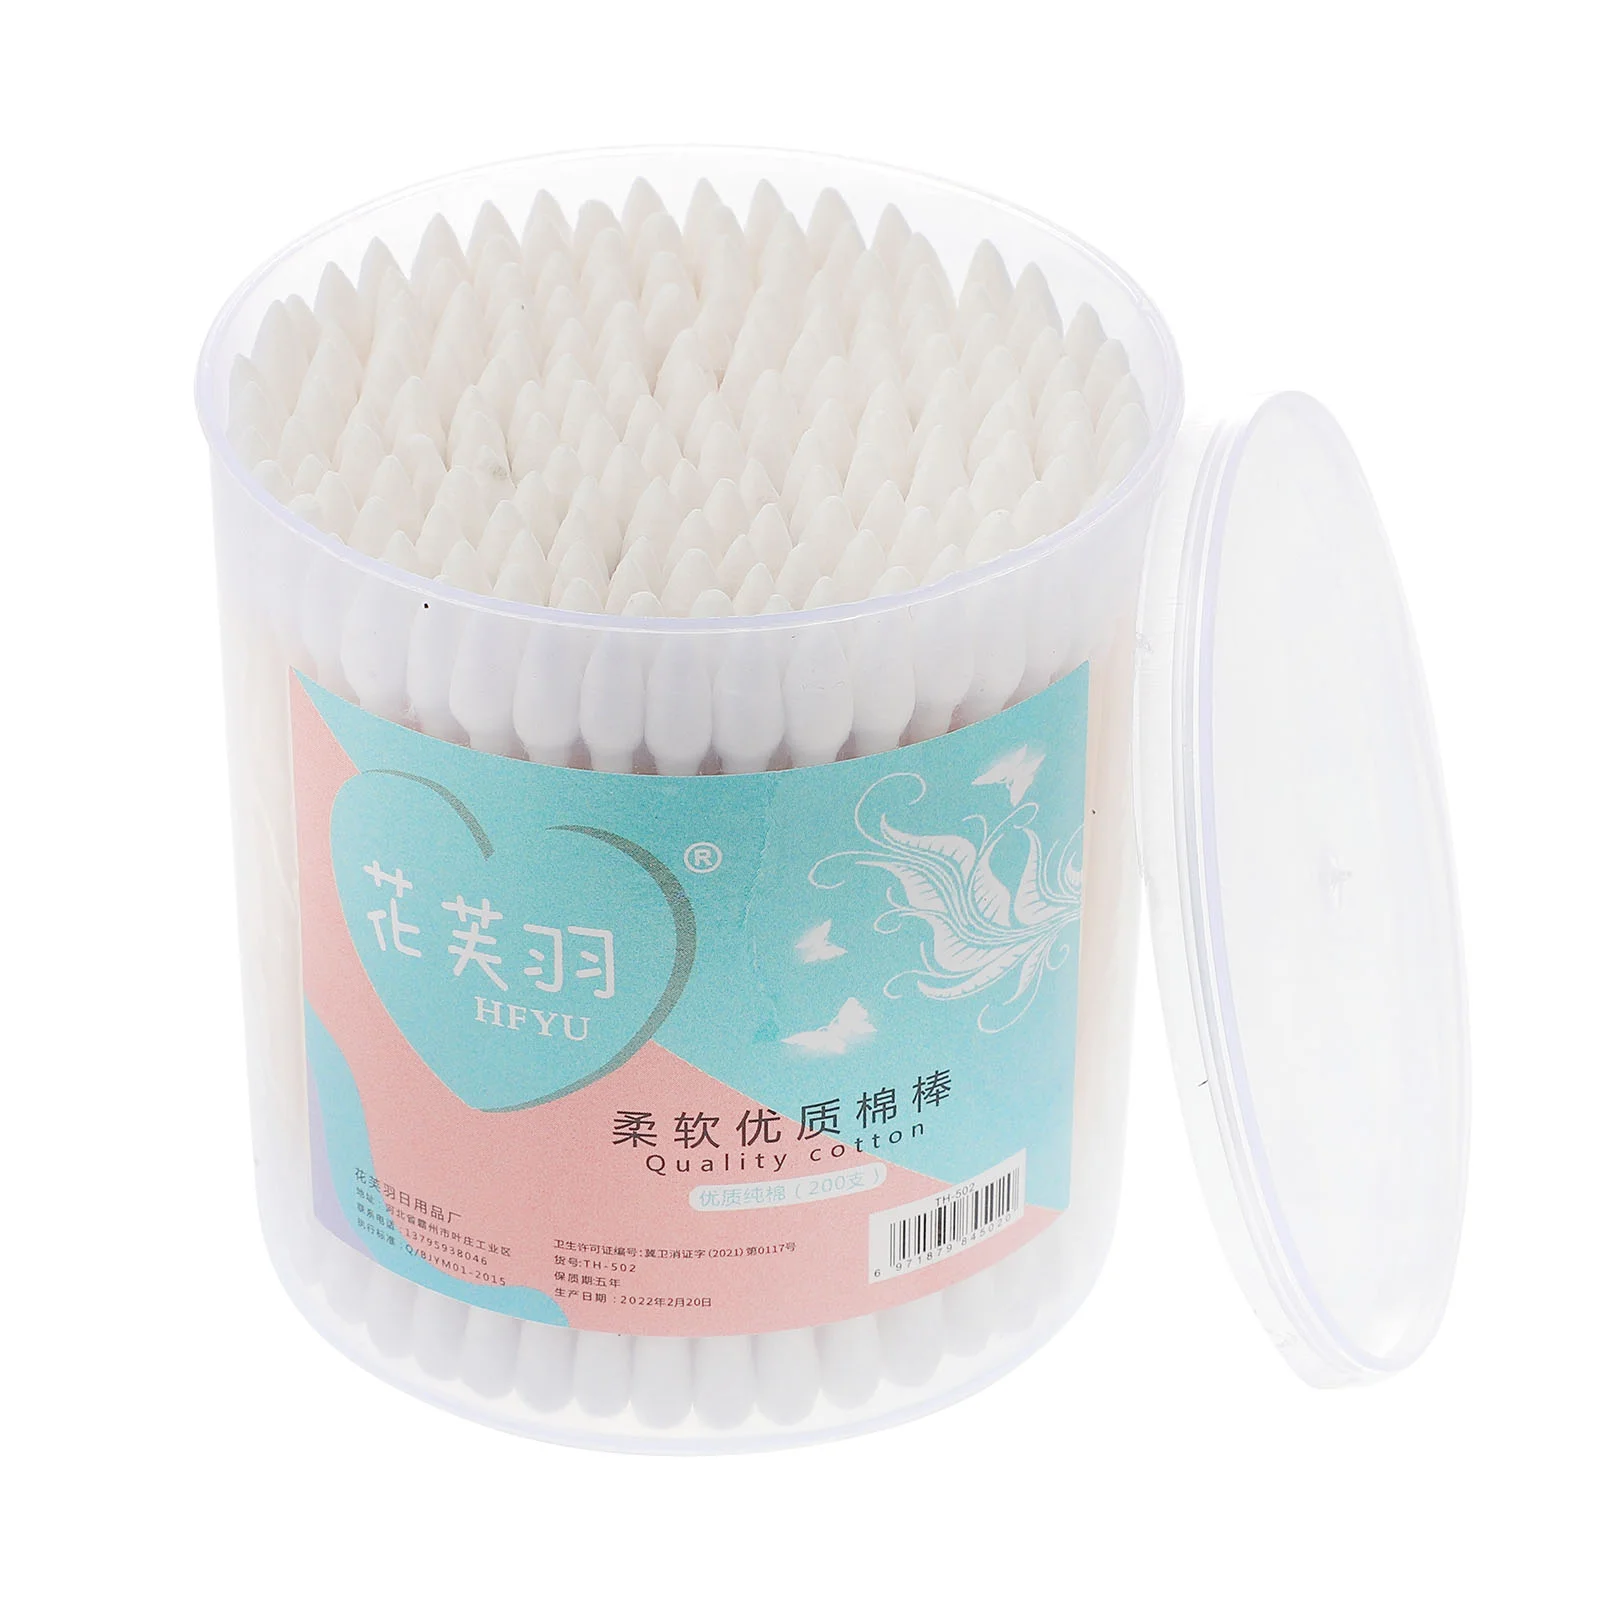 

Baby Cotton Swabs 2 Box 400Pcs Baby Safety Swabs Double Spiral Tips Cotton Swabs Paper Sticks Natural Cotton Buds Ear